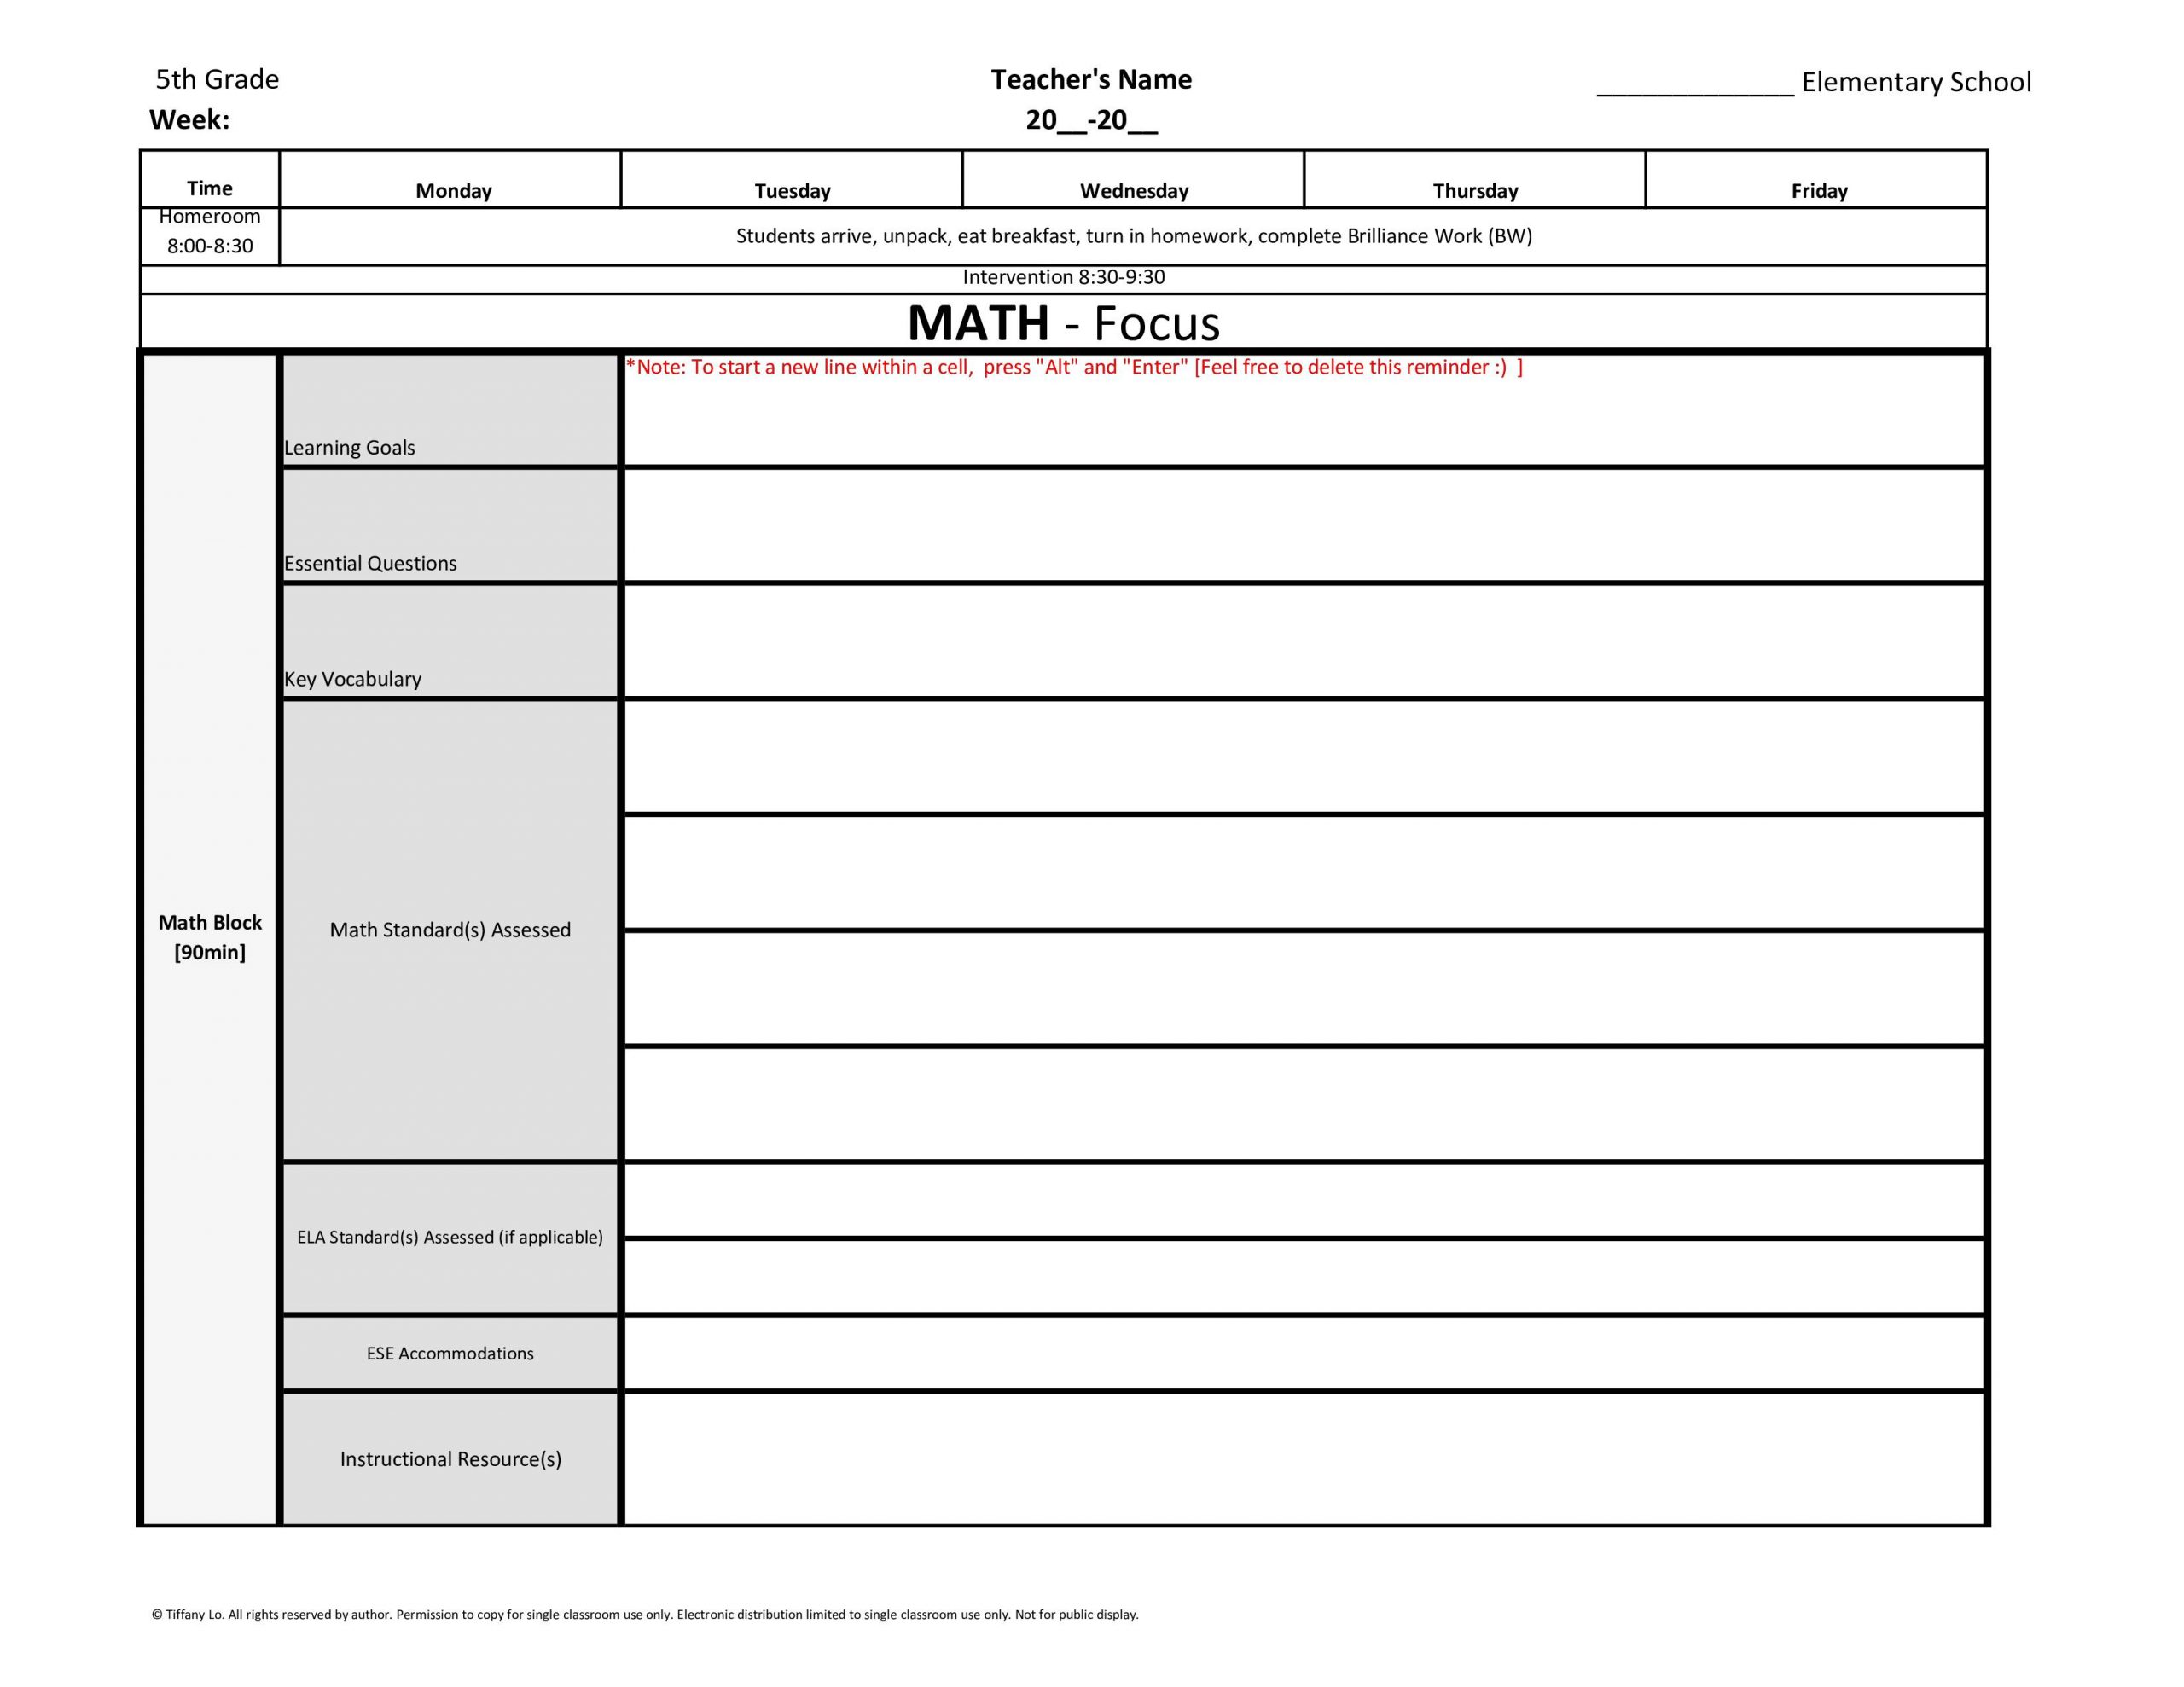 5Th Fifth Grade Common Core Weekly Lesson Plan Template W/ Drop Down Lists